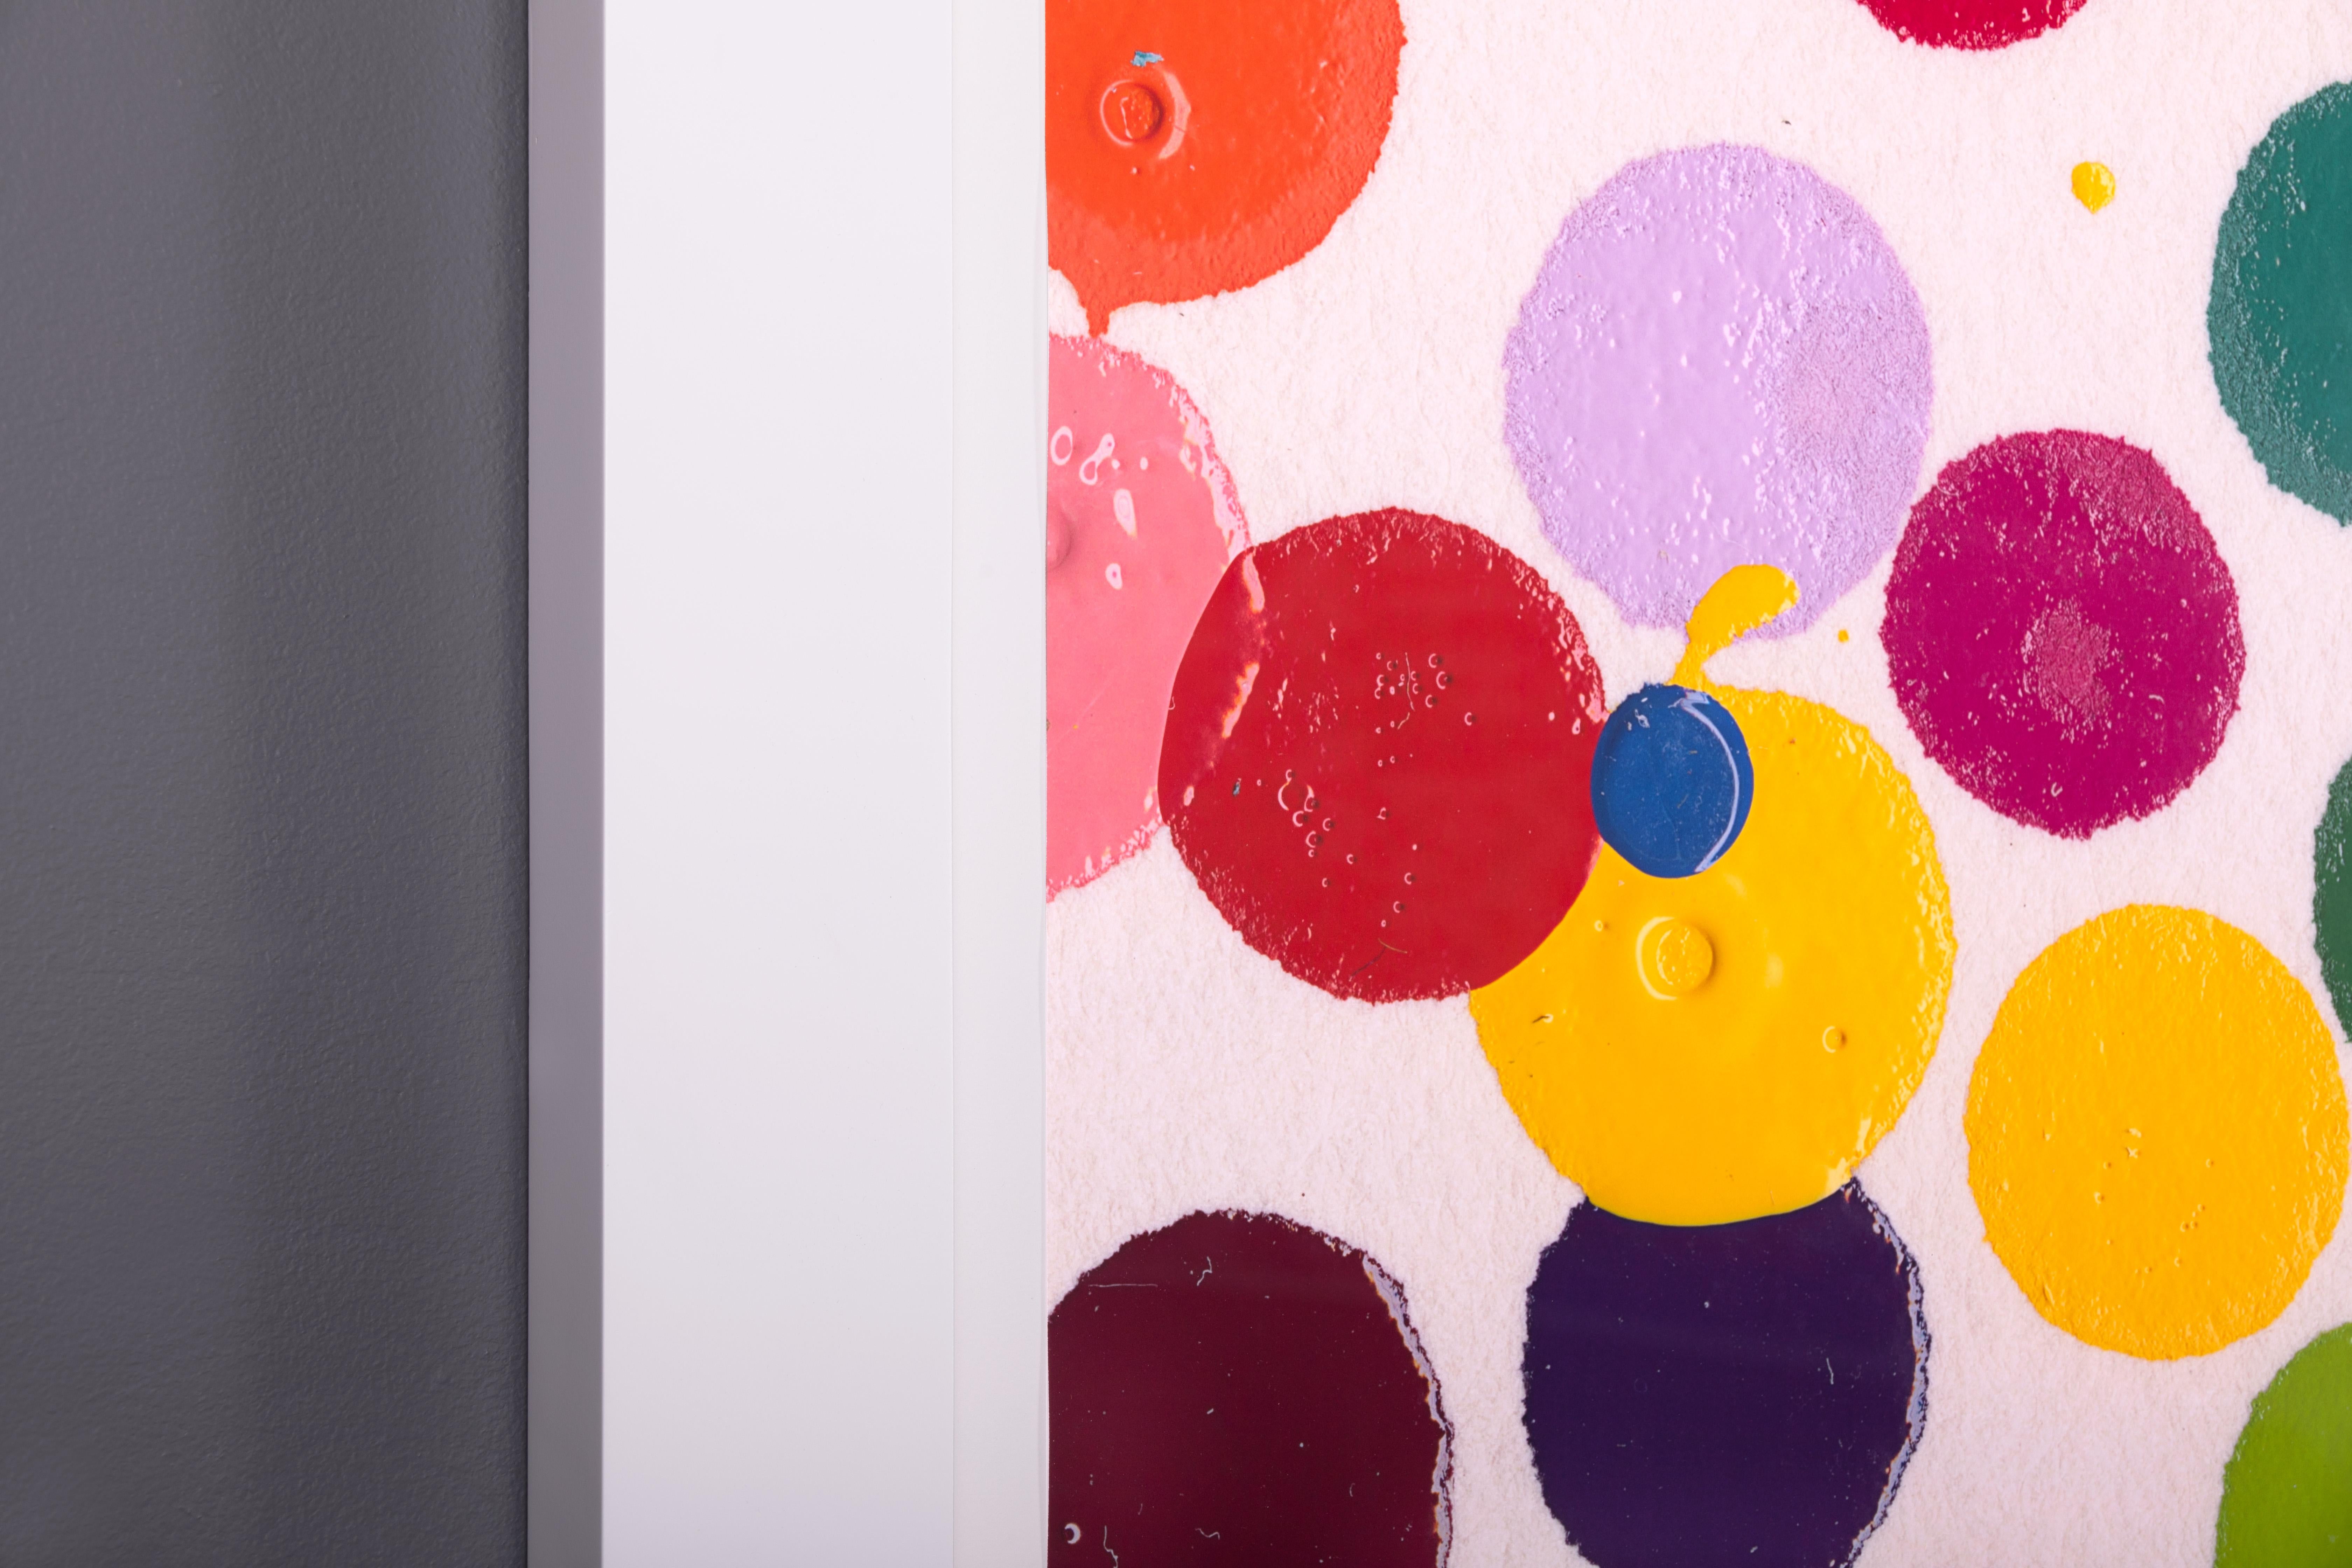 This large-scale iconic contemporary pop art 'Unique Spots' is a multi-color monoprint by Damien Hirst is the only one of its kind printed. The quintessential bright color palette of unique hues have made the 'Spot Series' an international